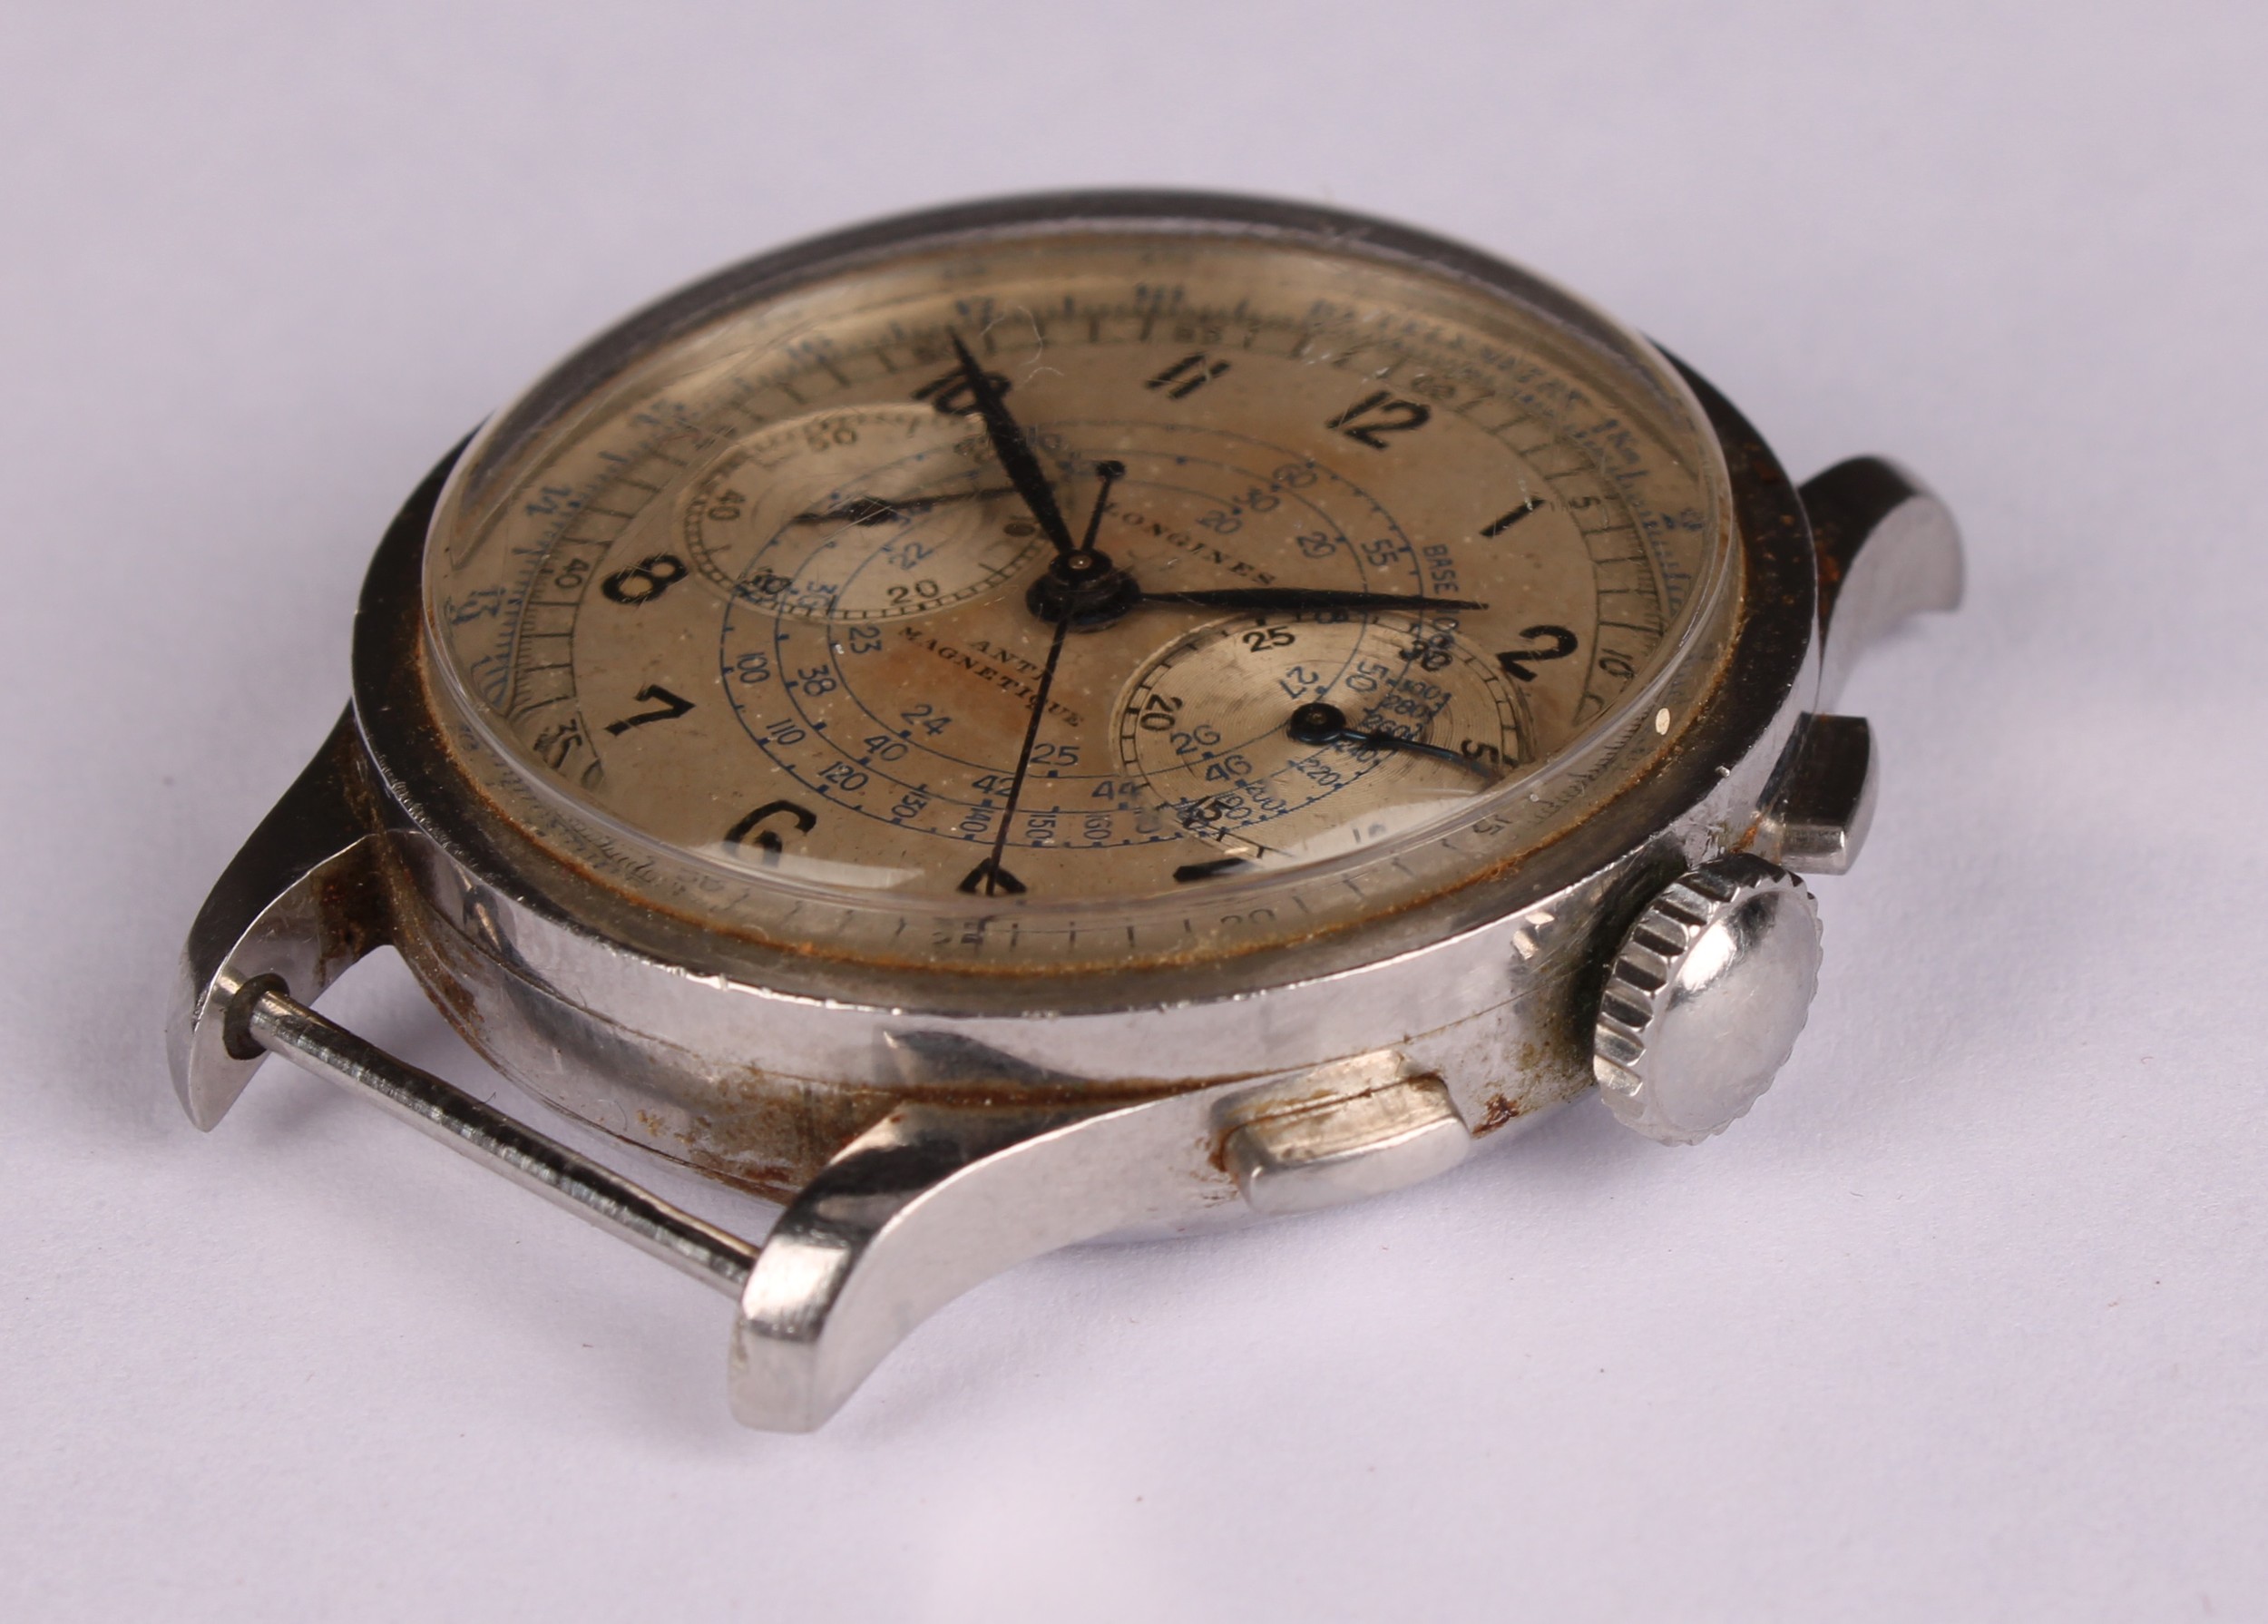 A Longines Telemetre stainless steel chronograph watch, silvered dial with Arabic numerals, pair - Image 3 of 5